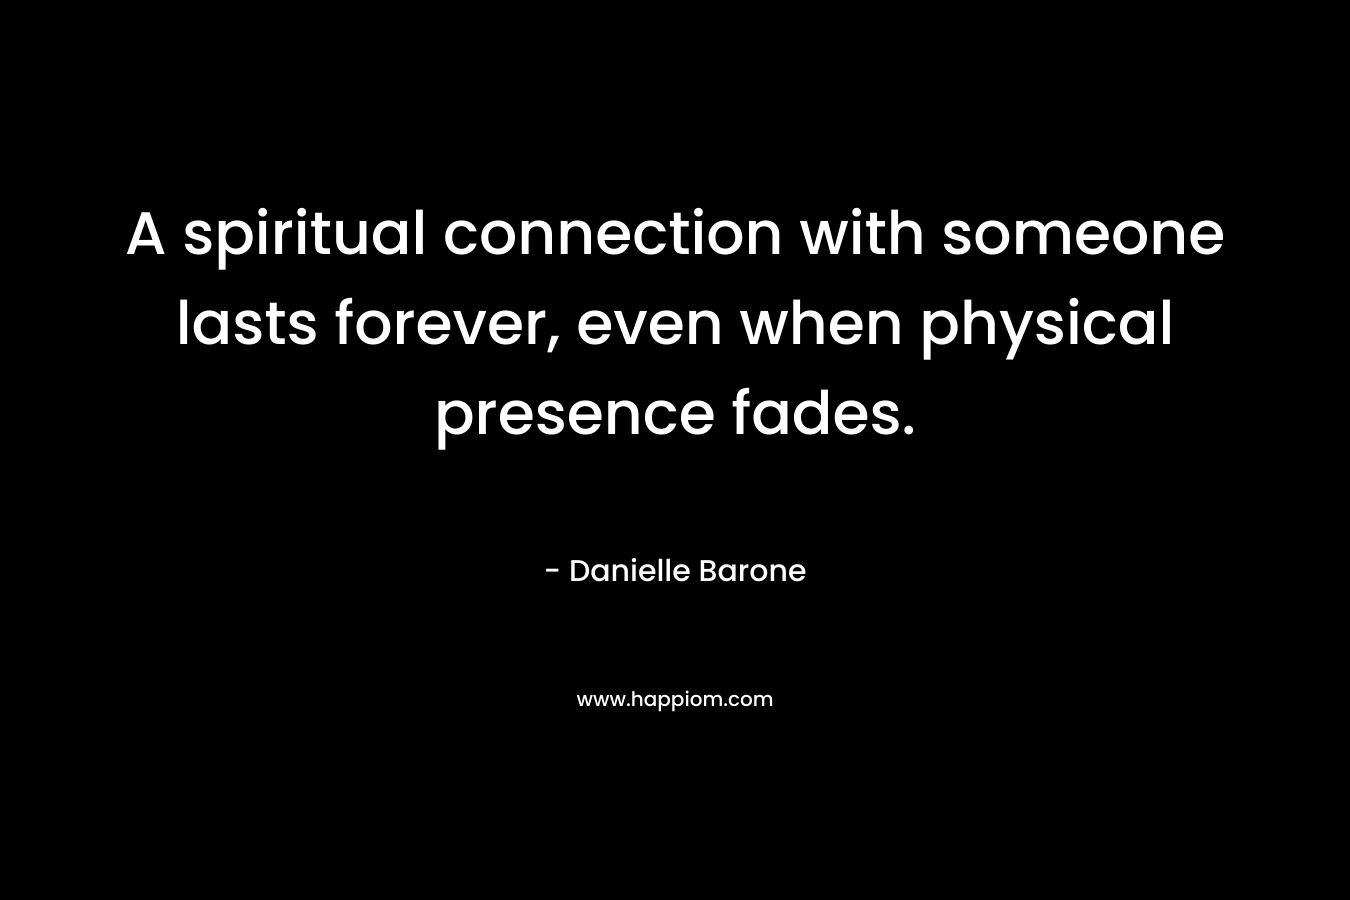 A spiritual connection with someone lasts forever, even when physical presence fades. – Danielle Barone